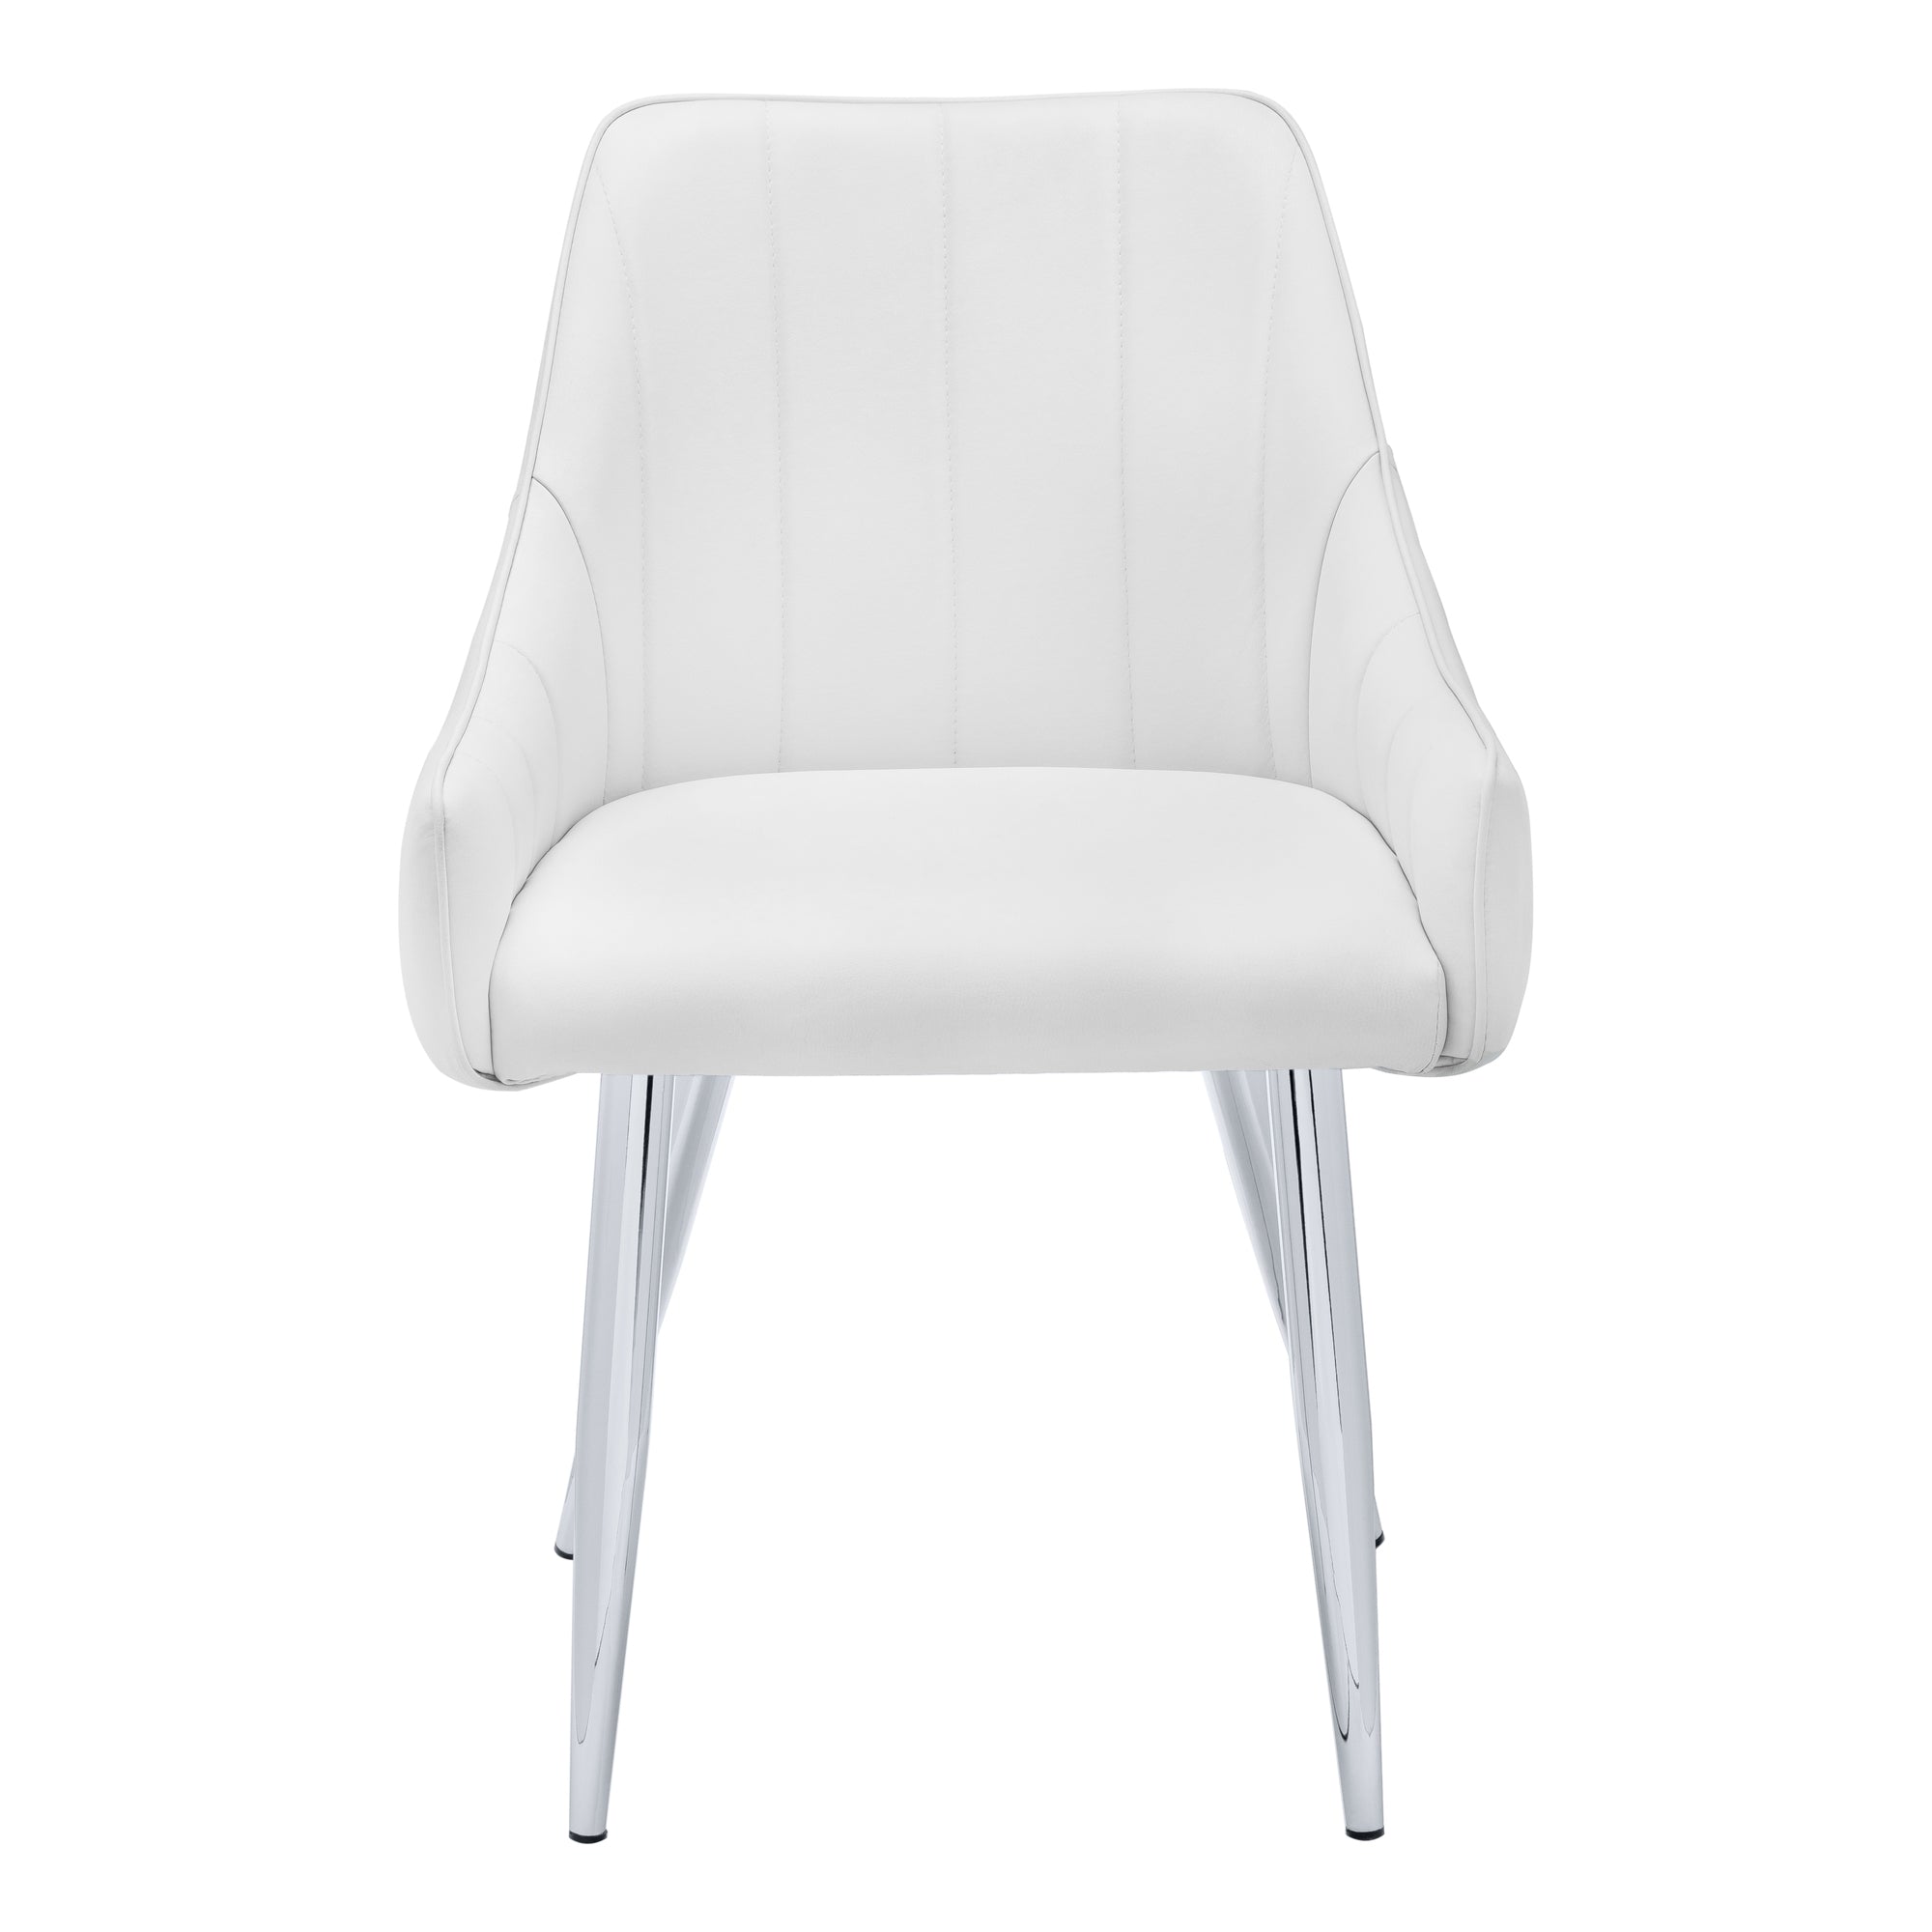 Mullan Luxury Low-Arm Dining Chair With Chrome Finished Legs (Set of 2 - White)